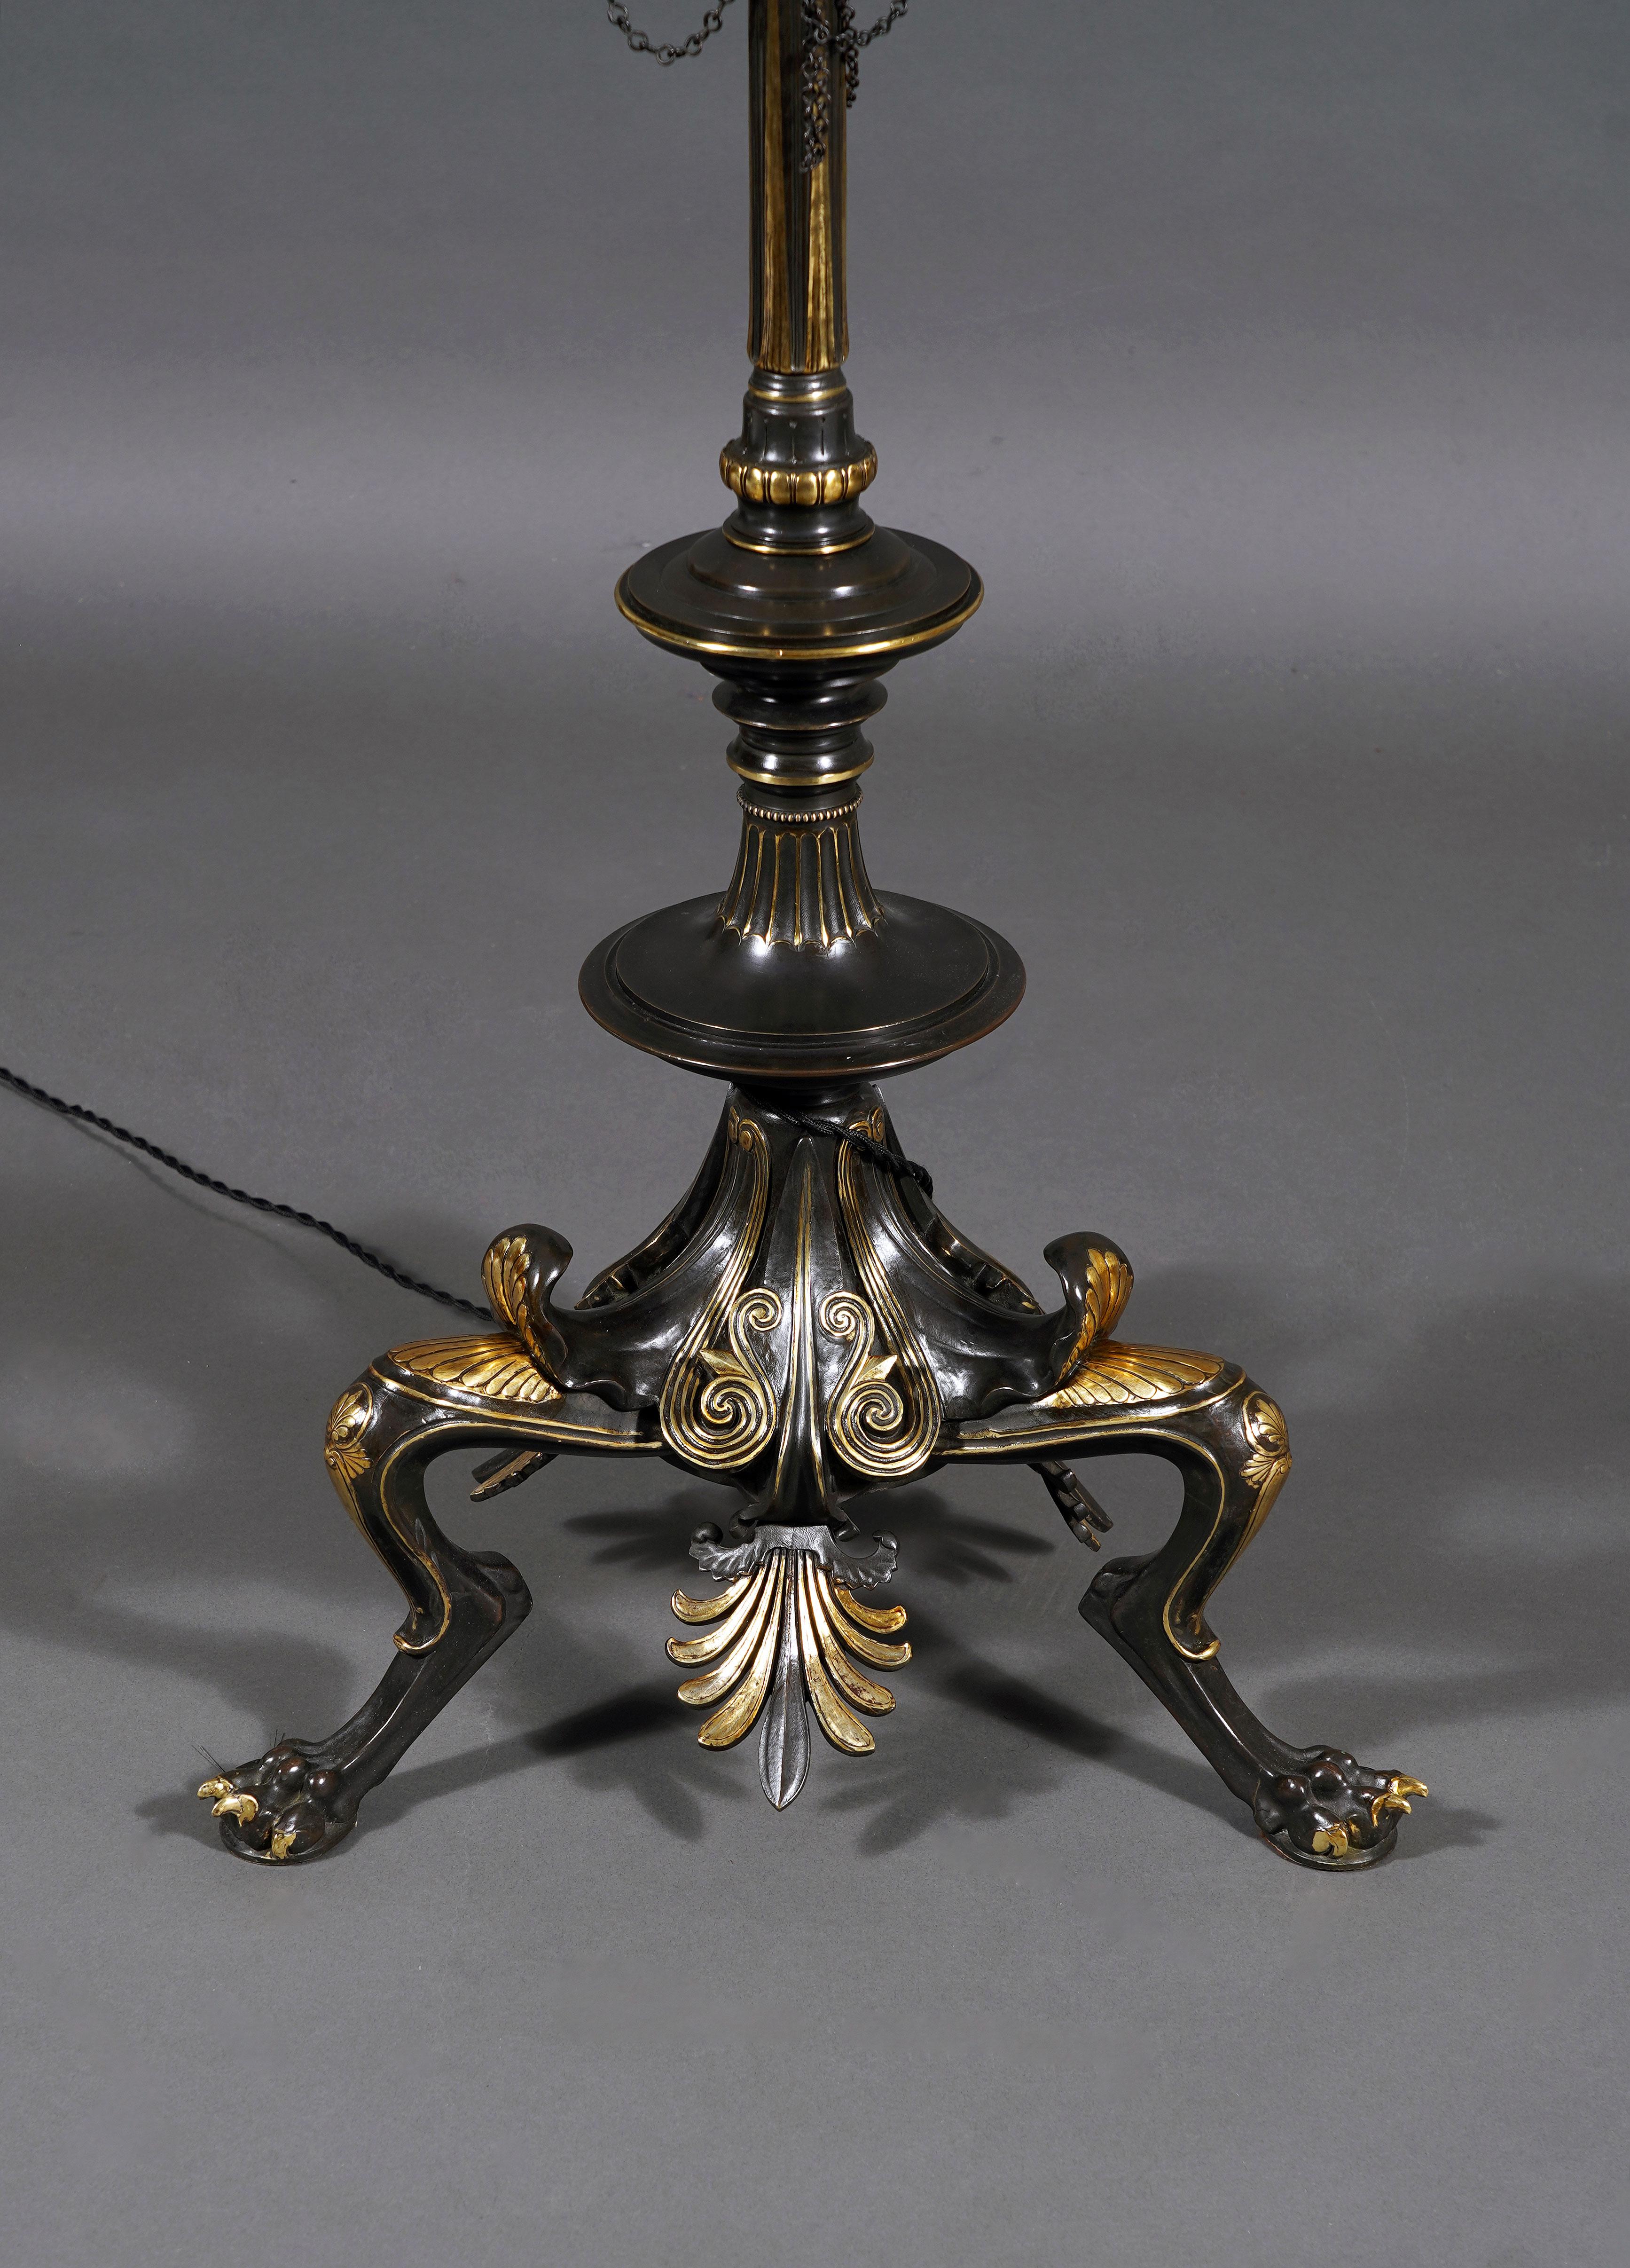 Glass Pair of Neo-Greek Floor Lamps Attributed to G. Servant, France, Circa 1870 For Sale